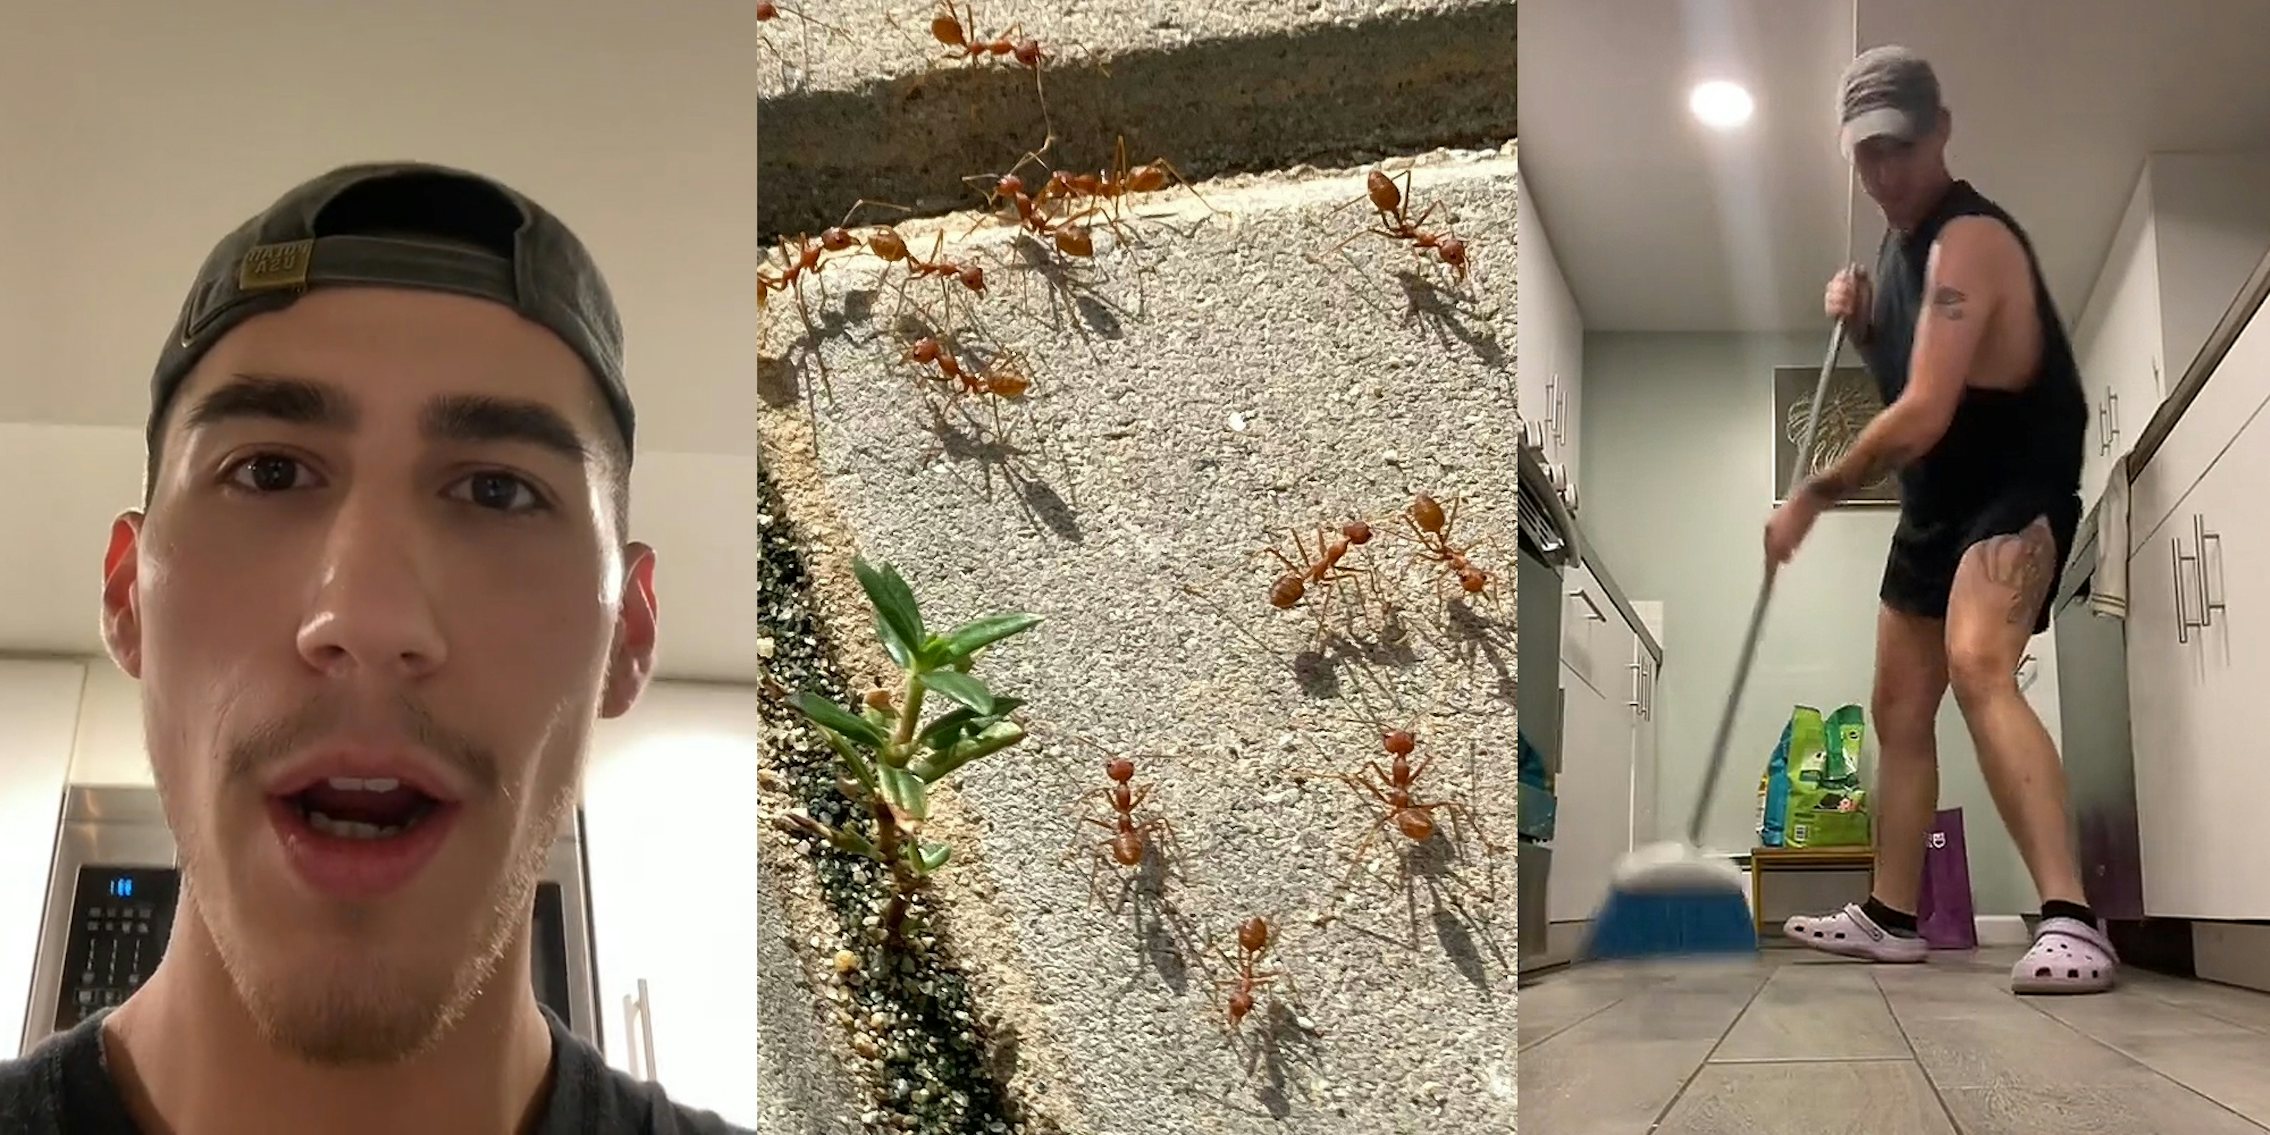 man speaking in front of white walls (l) ants on sidewalk outside (c) man aggressively sweeping kitchen (r)